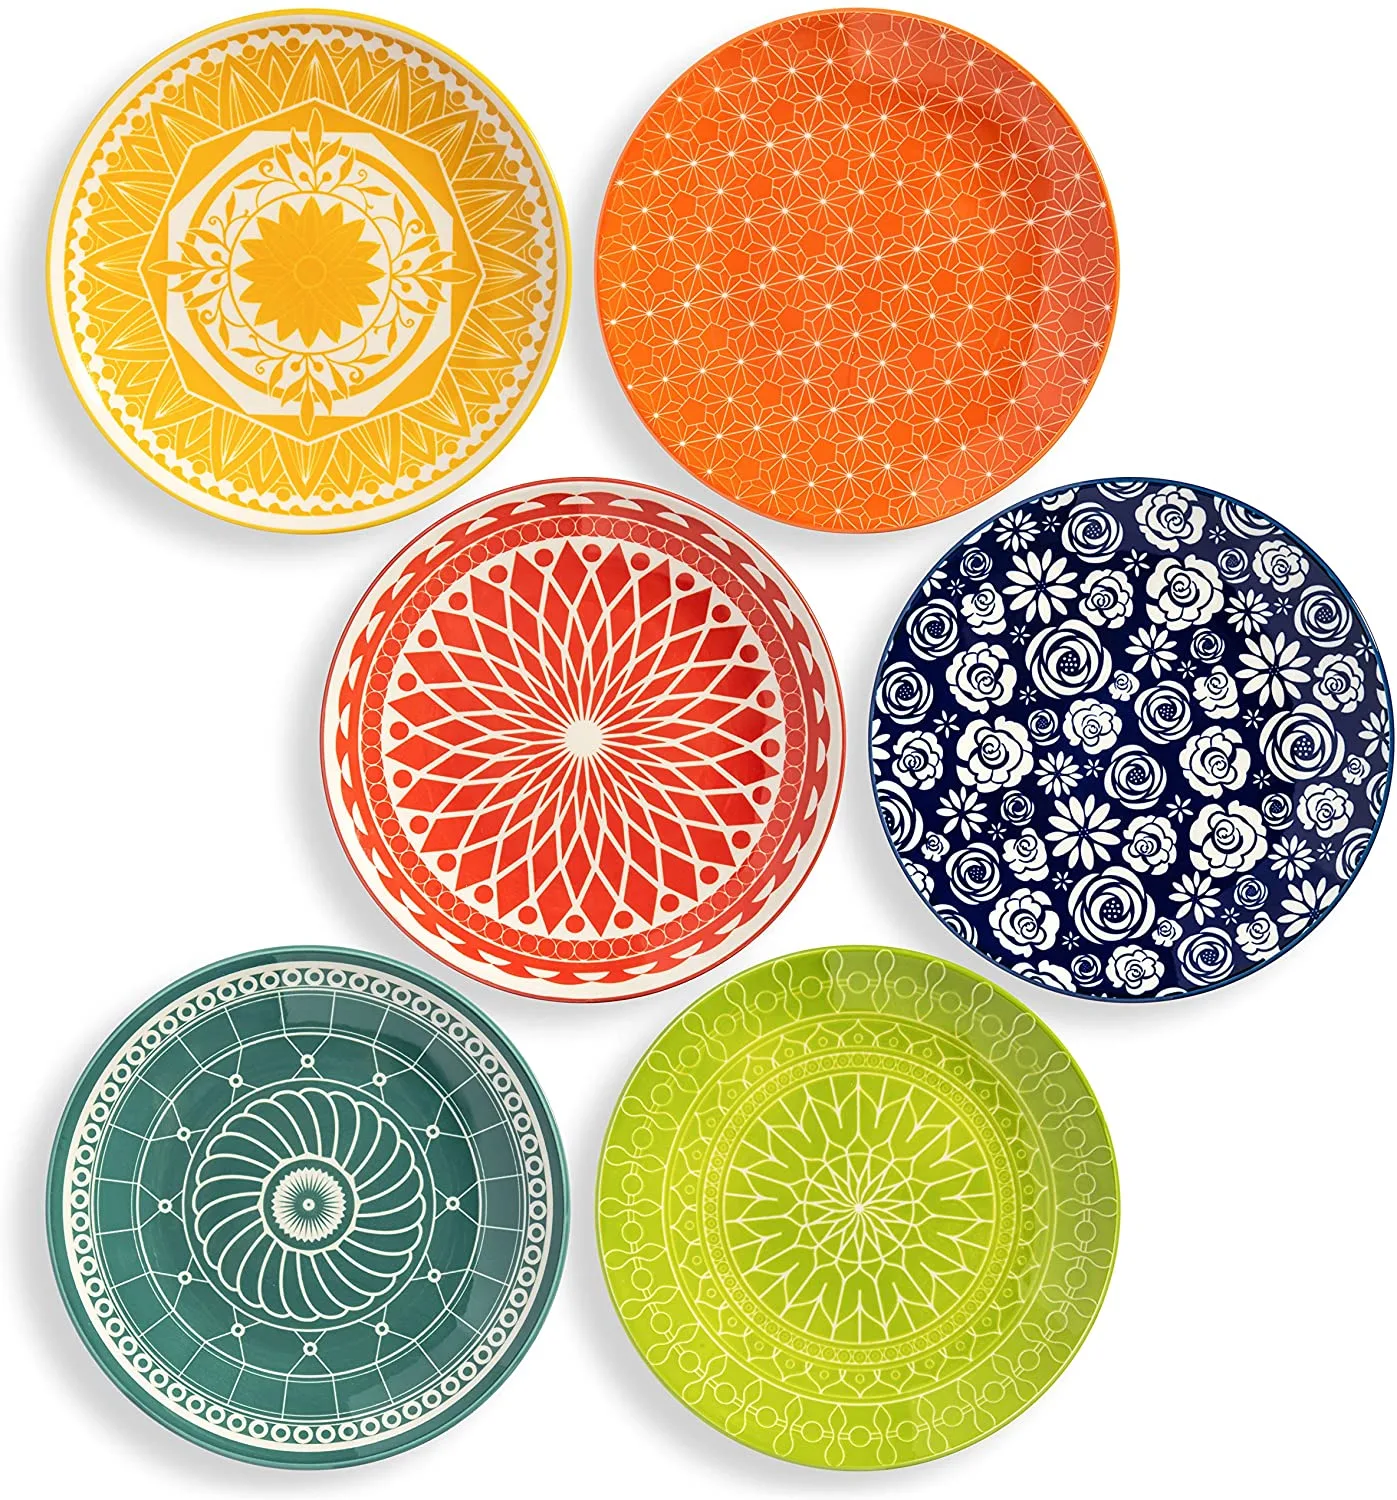 Annovero Salad/Luncheon Plates, Set of 6 Porcelain Plates